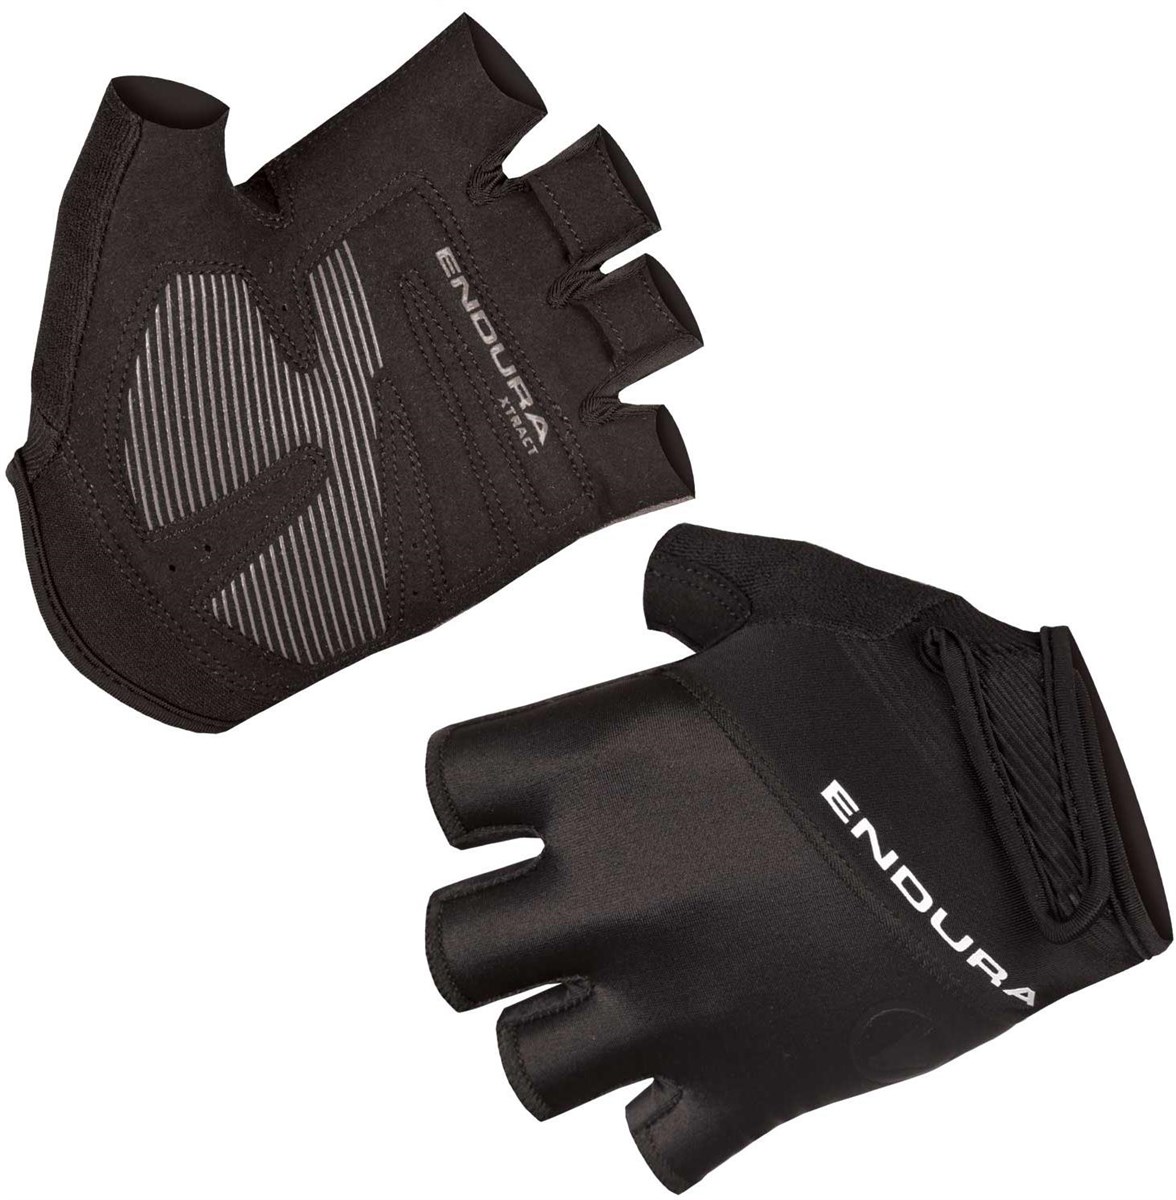 Endura Xtract Mitts II / Short Finger Cycling Gloves product image